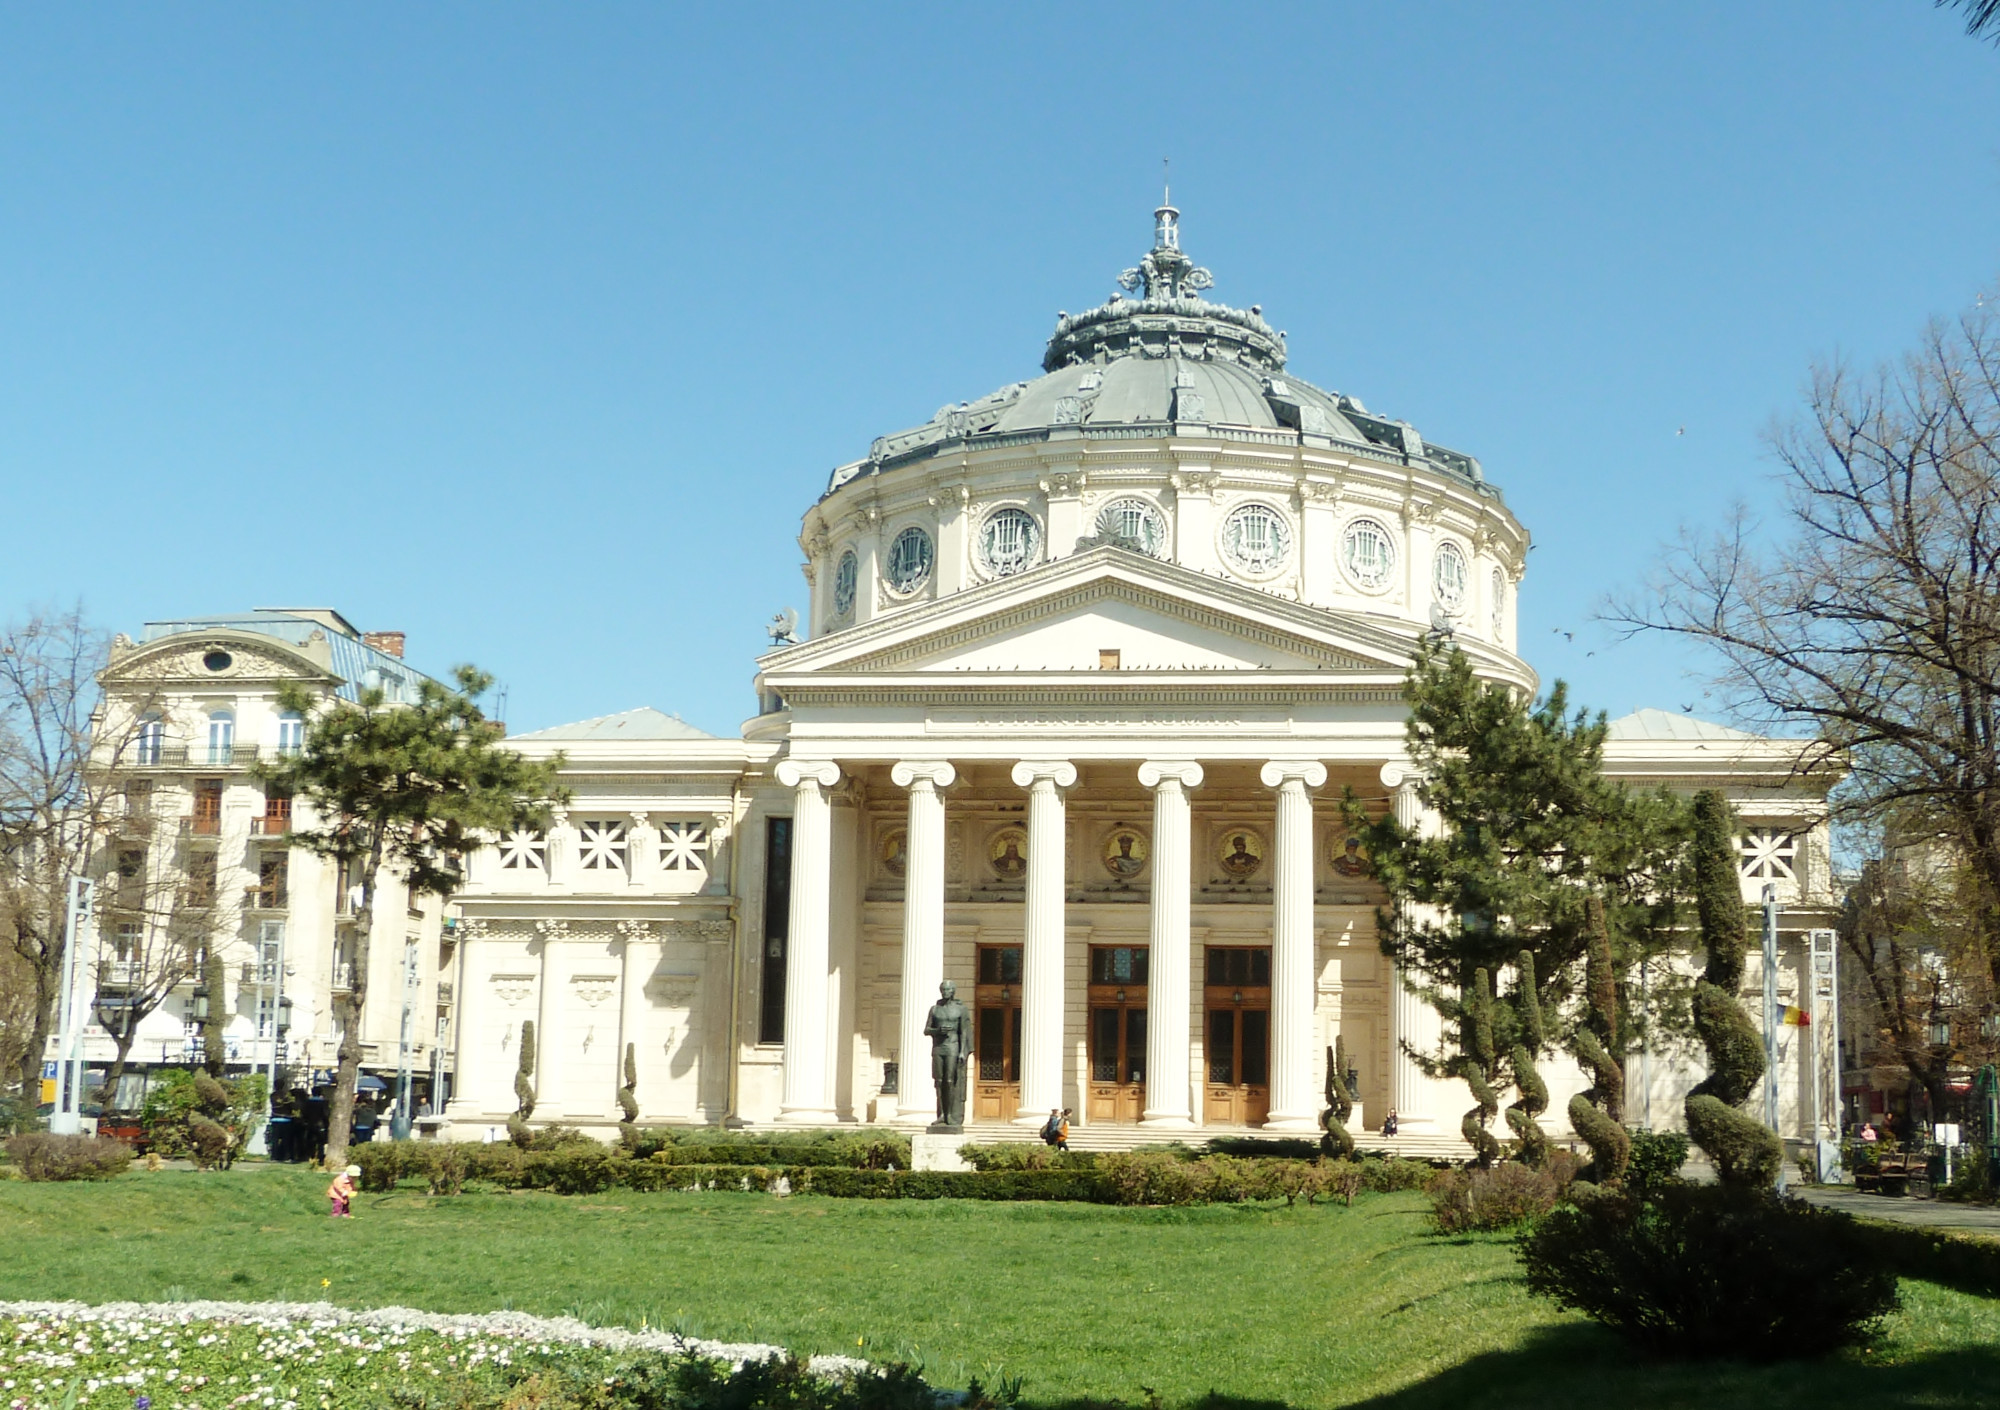 Romanian Athenaeum<br/>
Performing arts theater